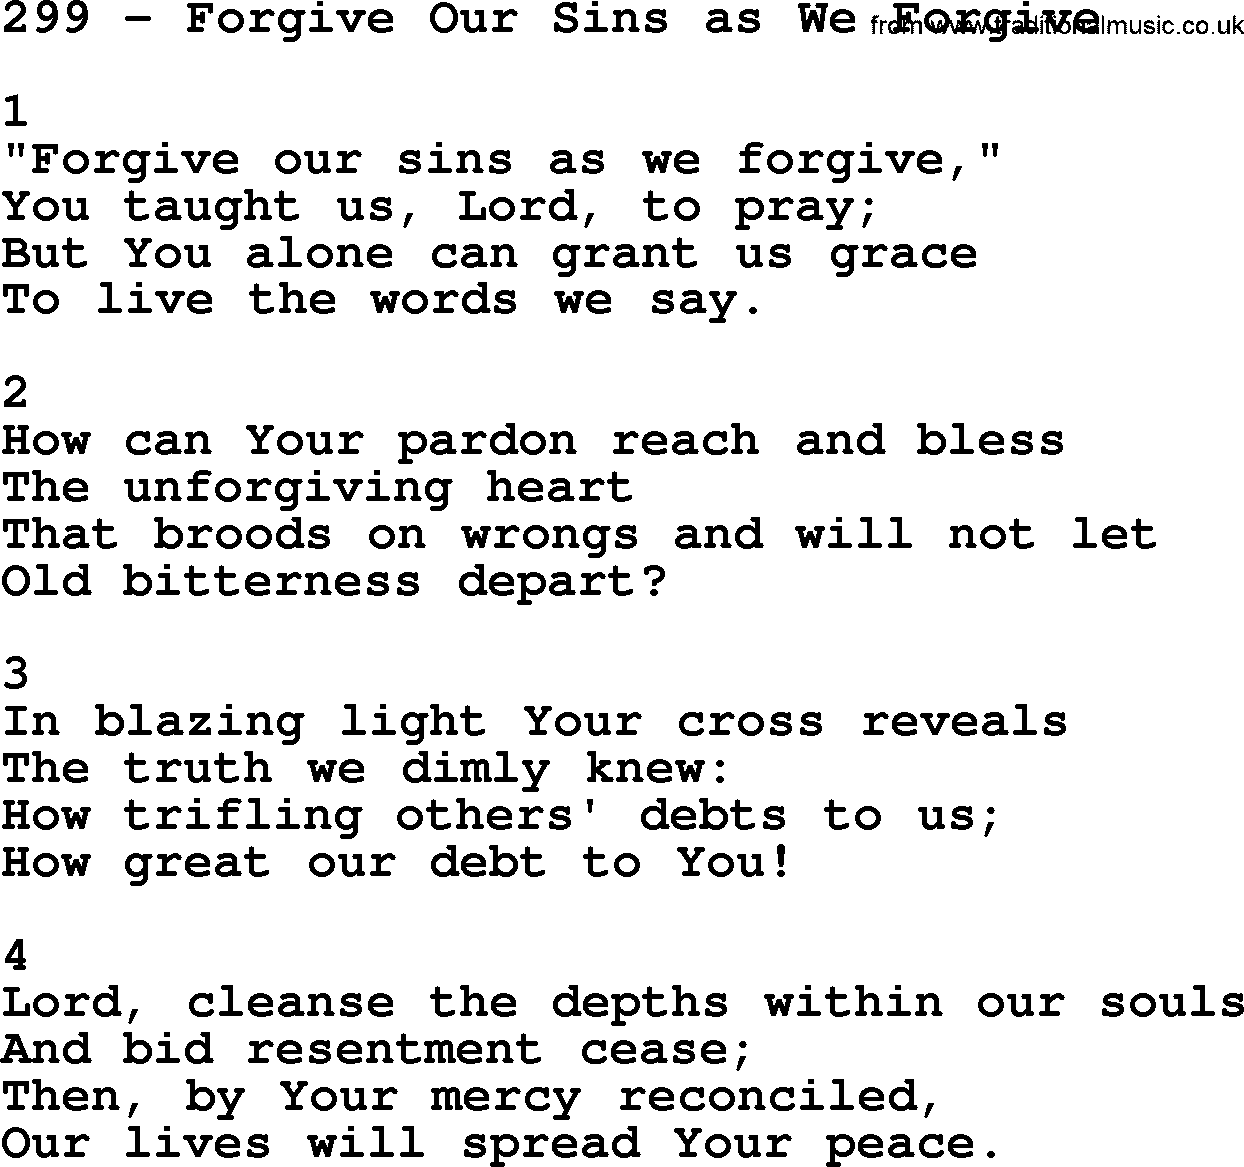 Complete Adventis Hymnal, title: 299-Forgive Our Sins As We Forgive, with lyrics, midi, mp3, powerpoints(PPT) and PDF,